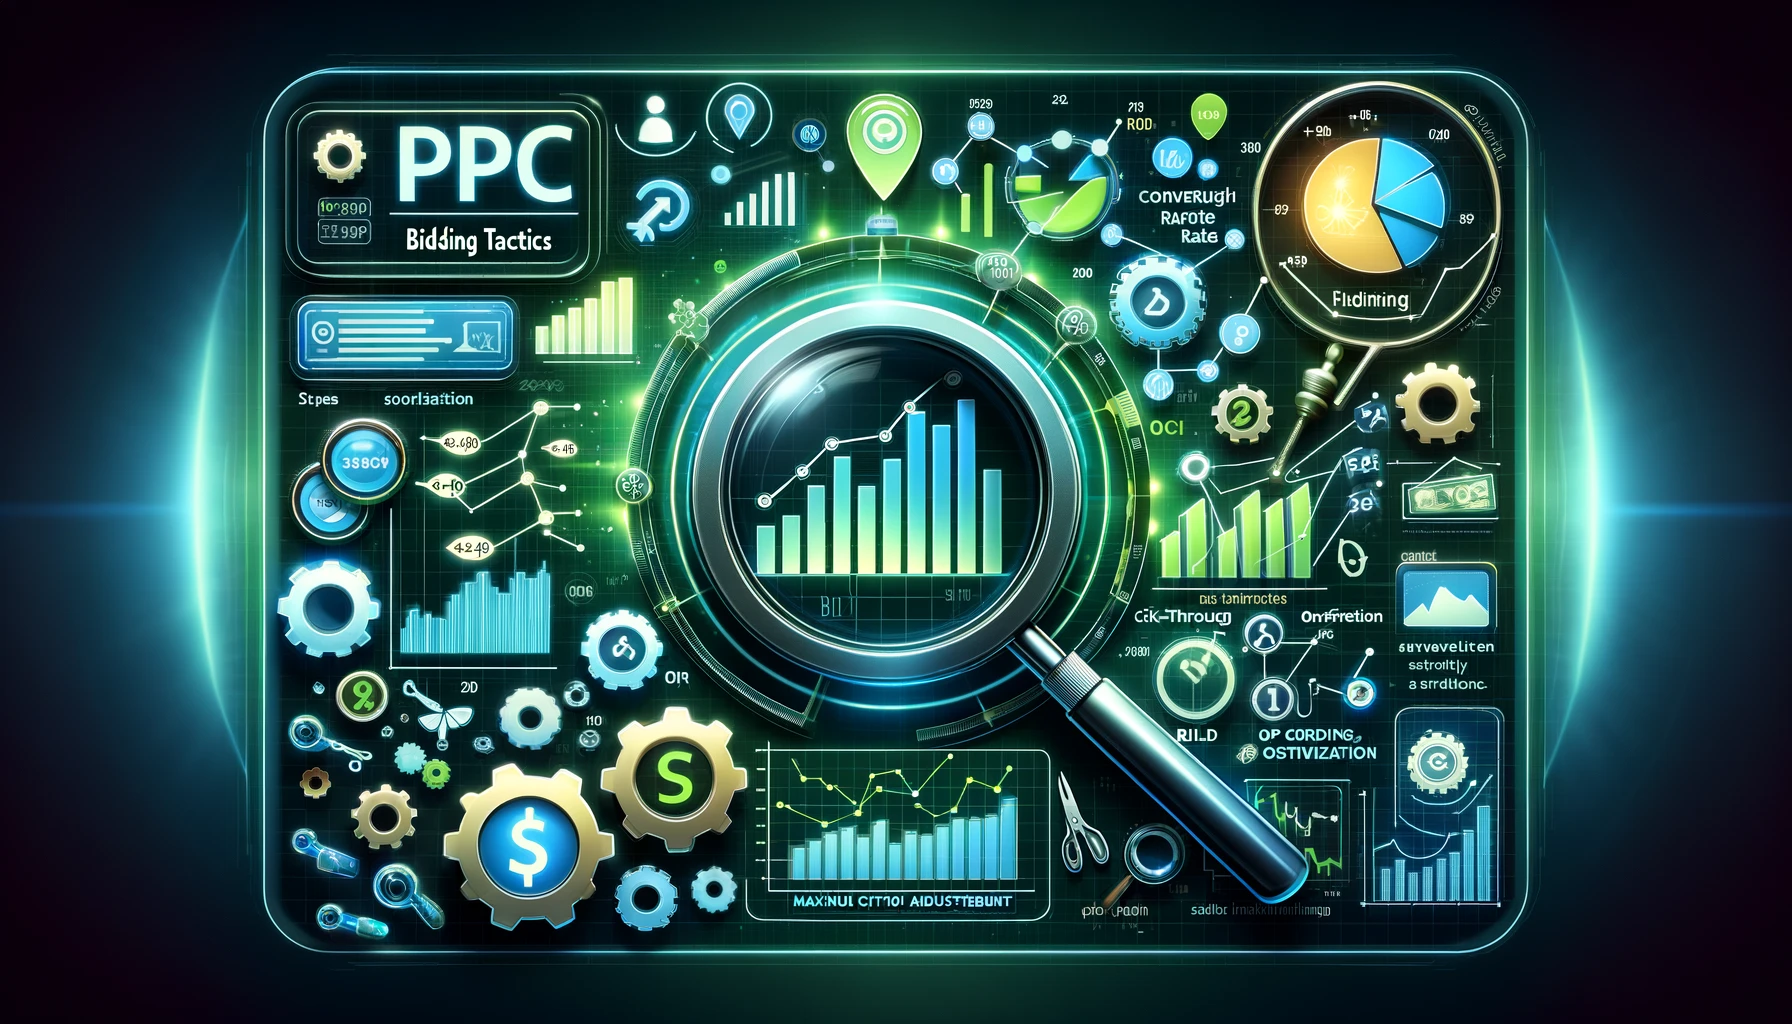 A digital marketing dashboard depicting the strategic optimization of PPC Bidding Tactics, featuring trends in click-through and conversion rates.